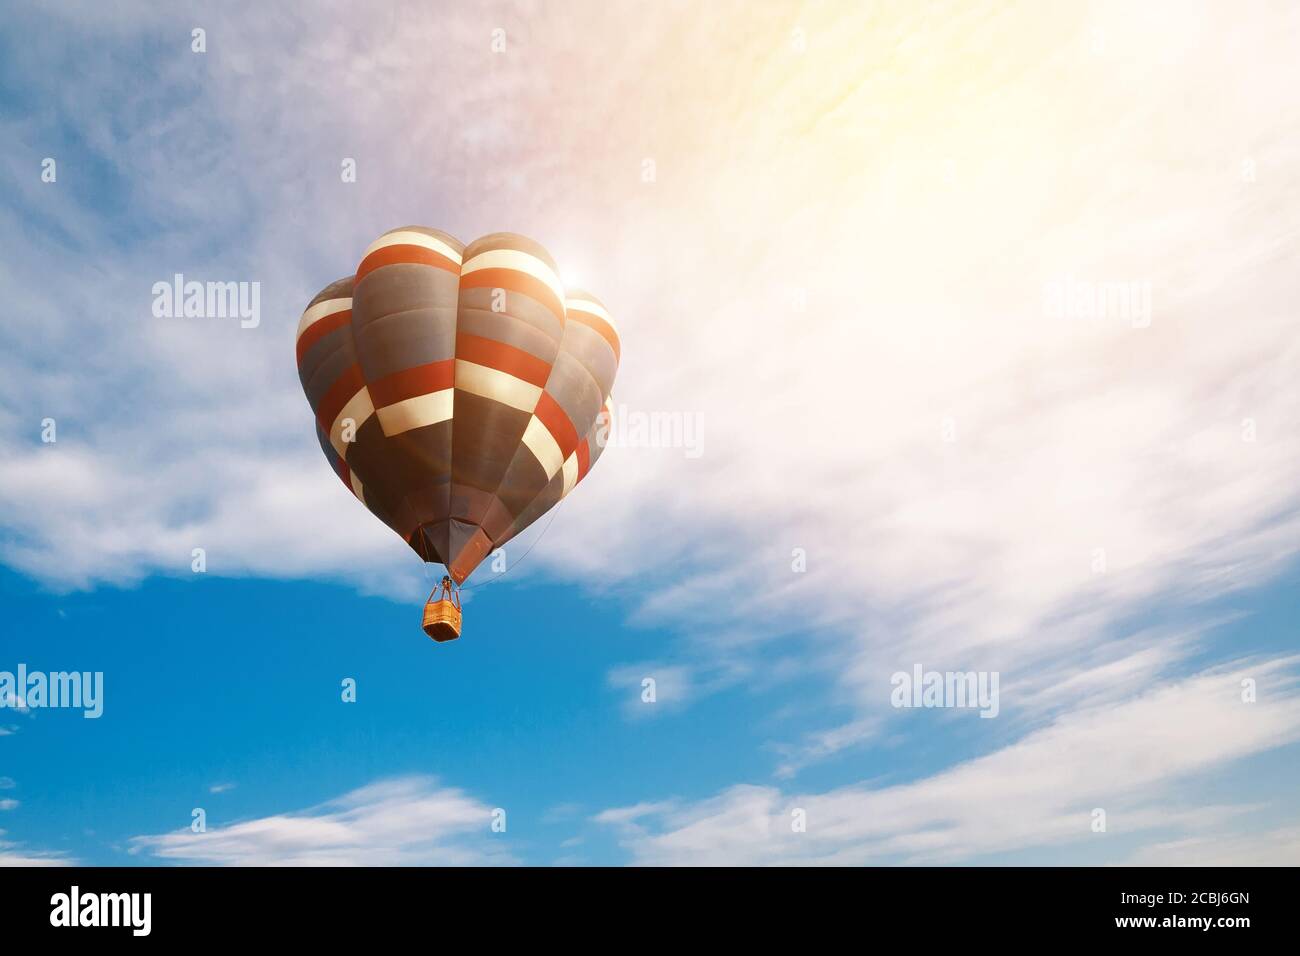 Travel and tourism concept. Colorful hot air balloon flying at sunrise with cloudy blue sky background Stock Photo